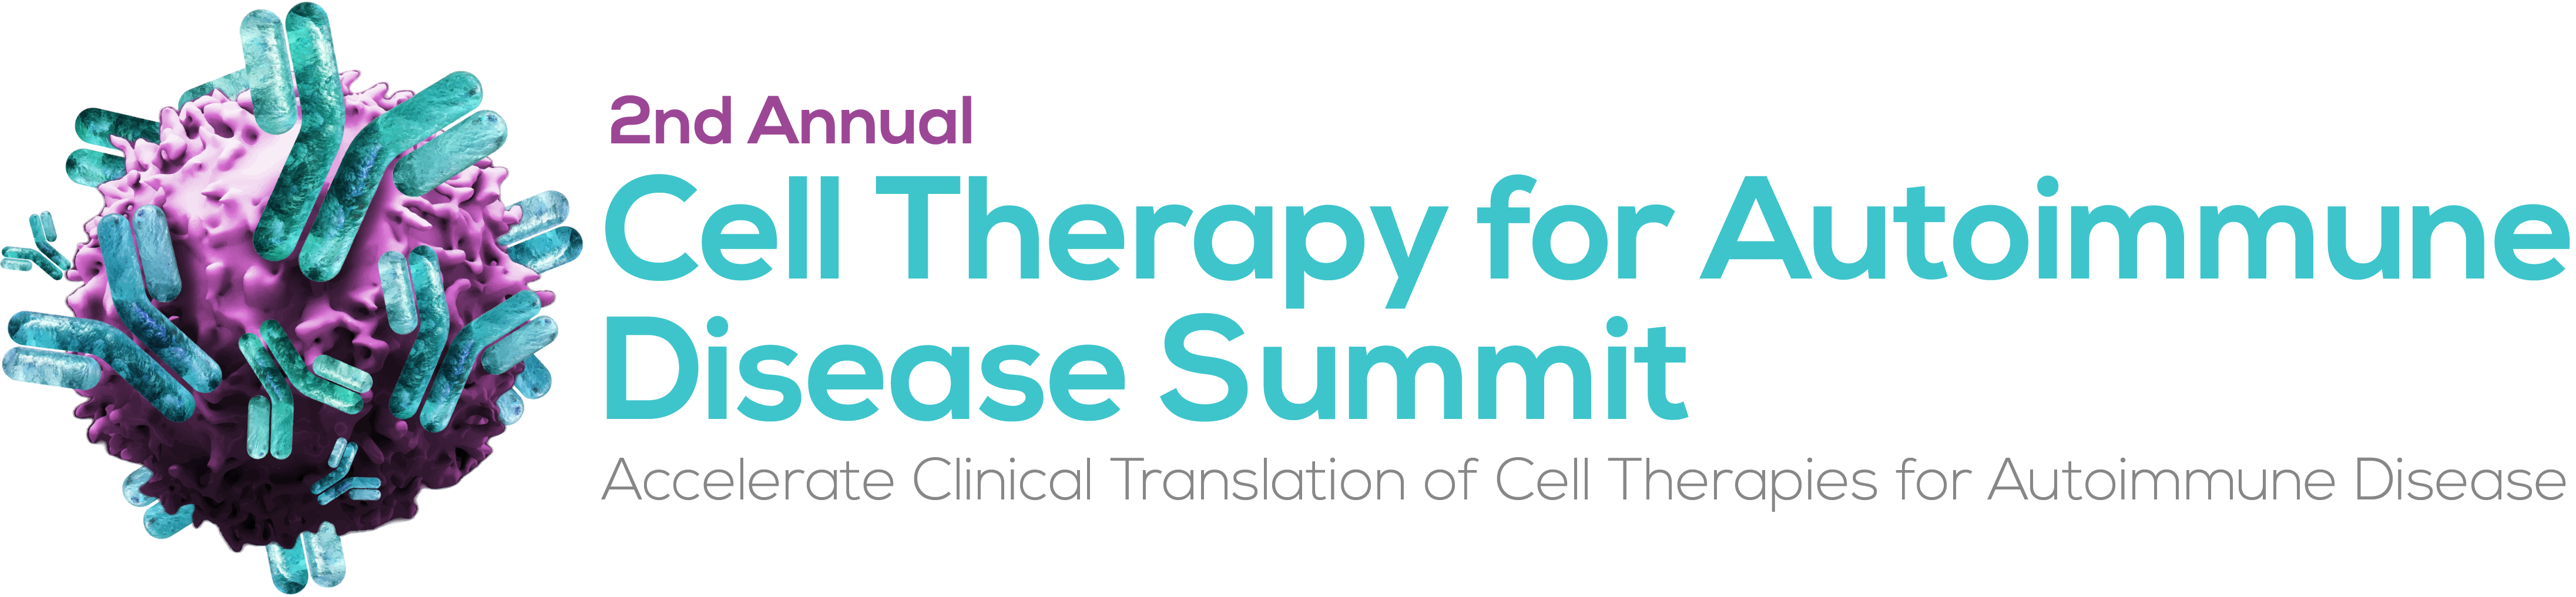 2nd Annual Cell Therapy for Autoimmune Disease Summit